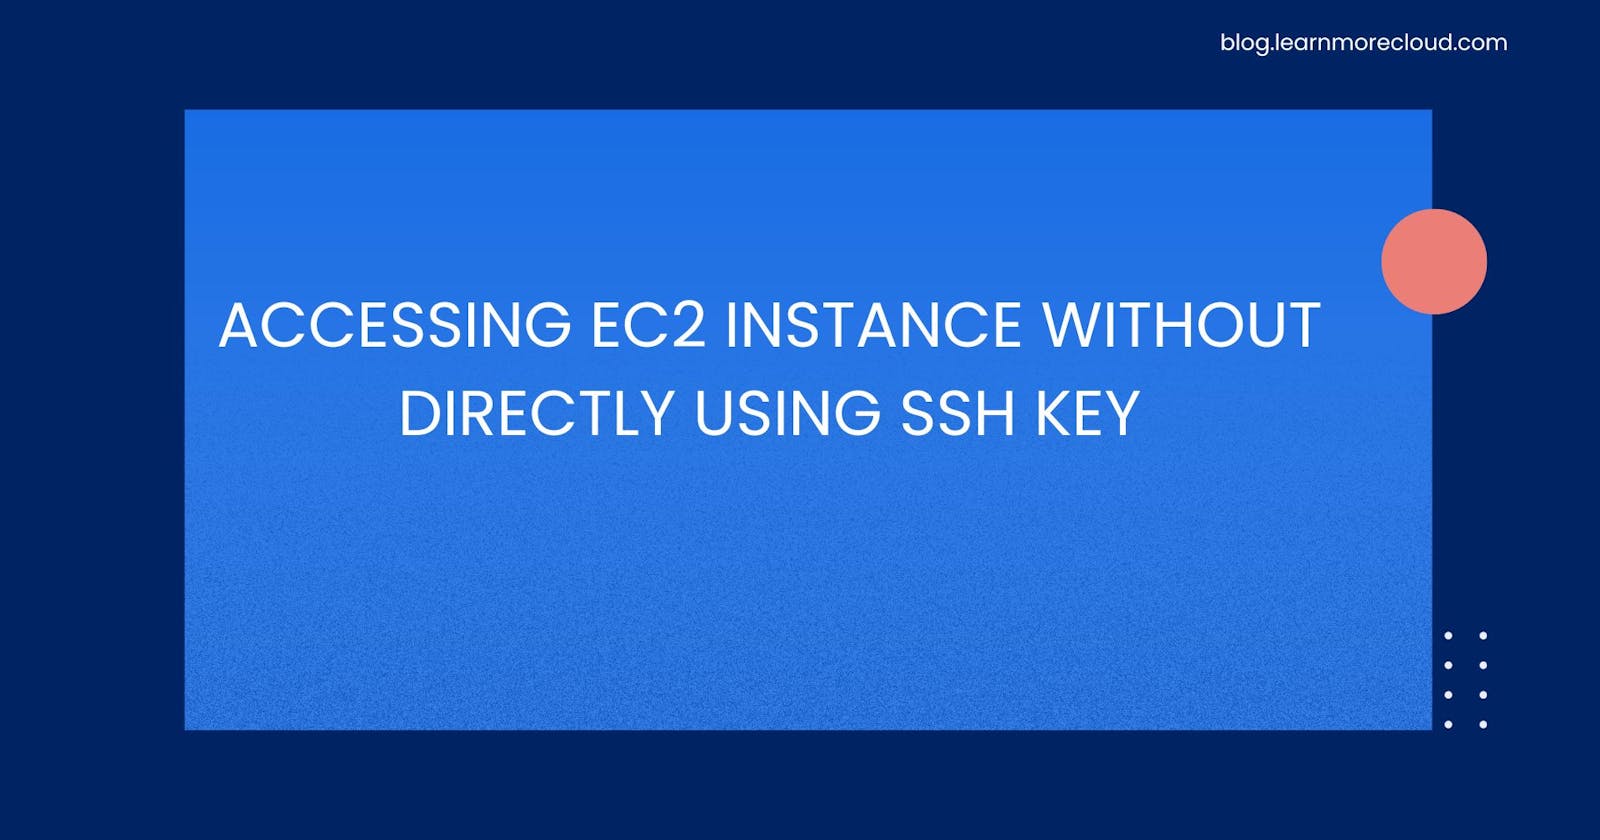 Accessing EC2 without using SSH key